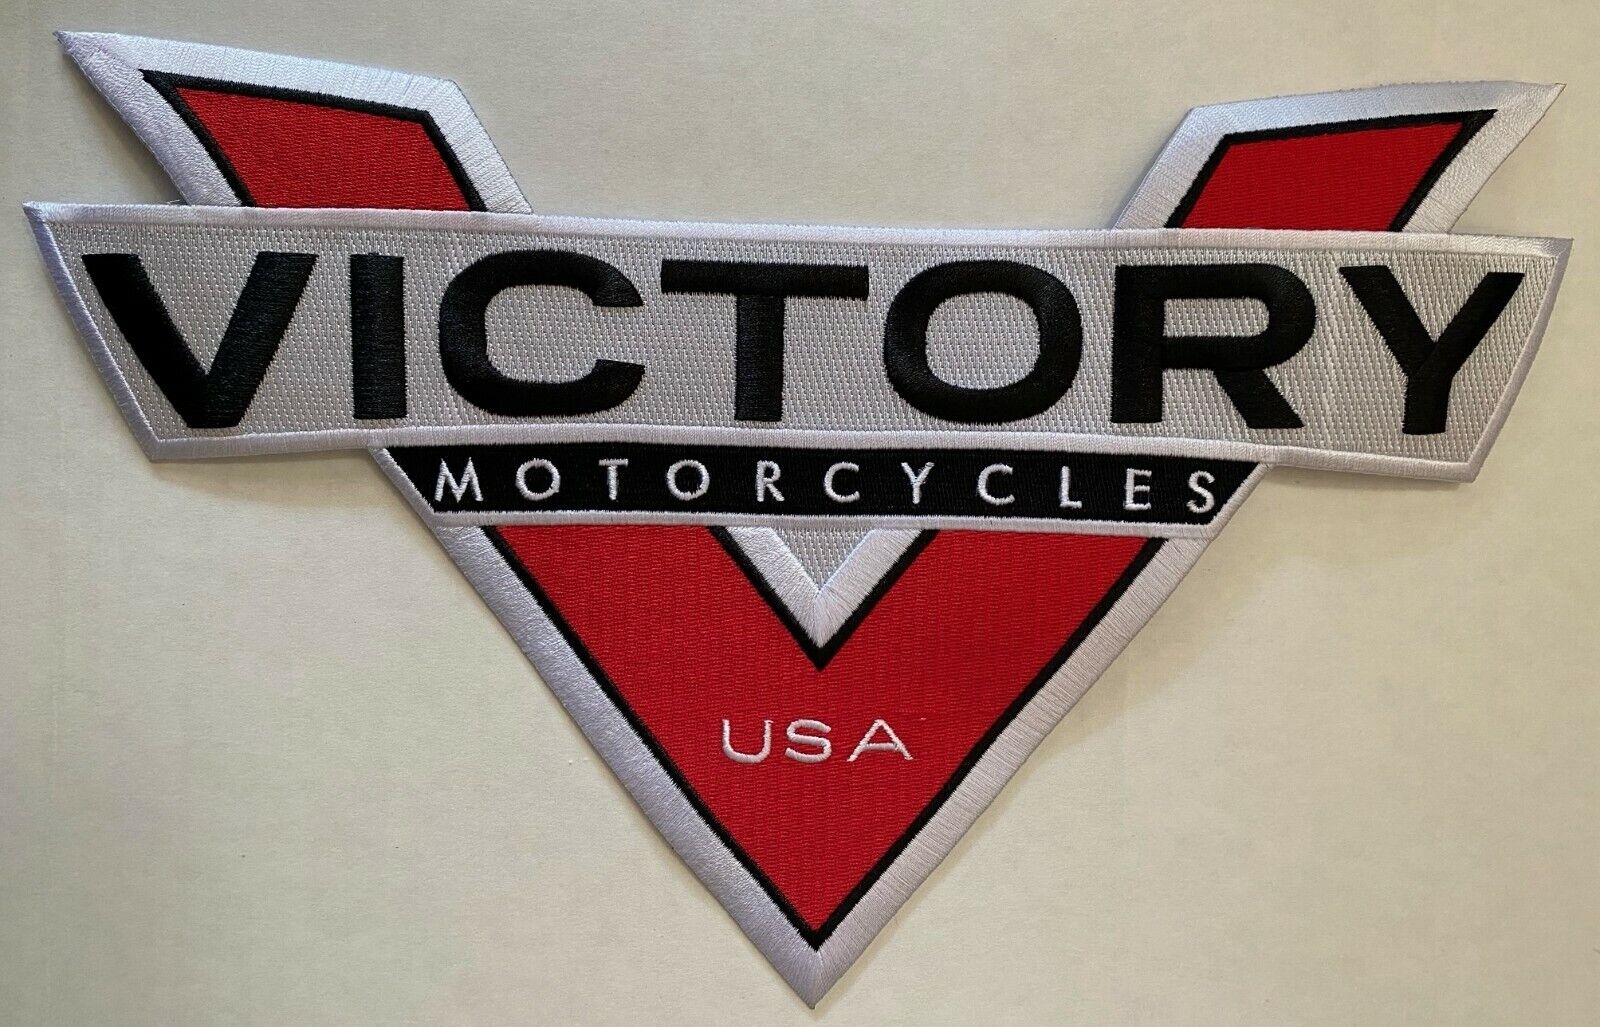 VICTORY Motorcycle NEW Super Size embroidered back patch 12 3/8